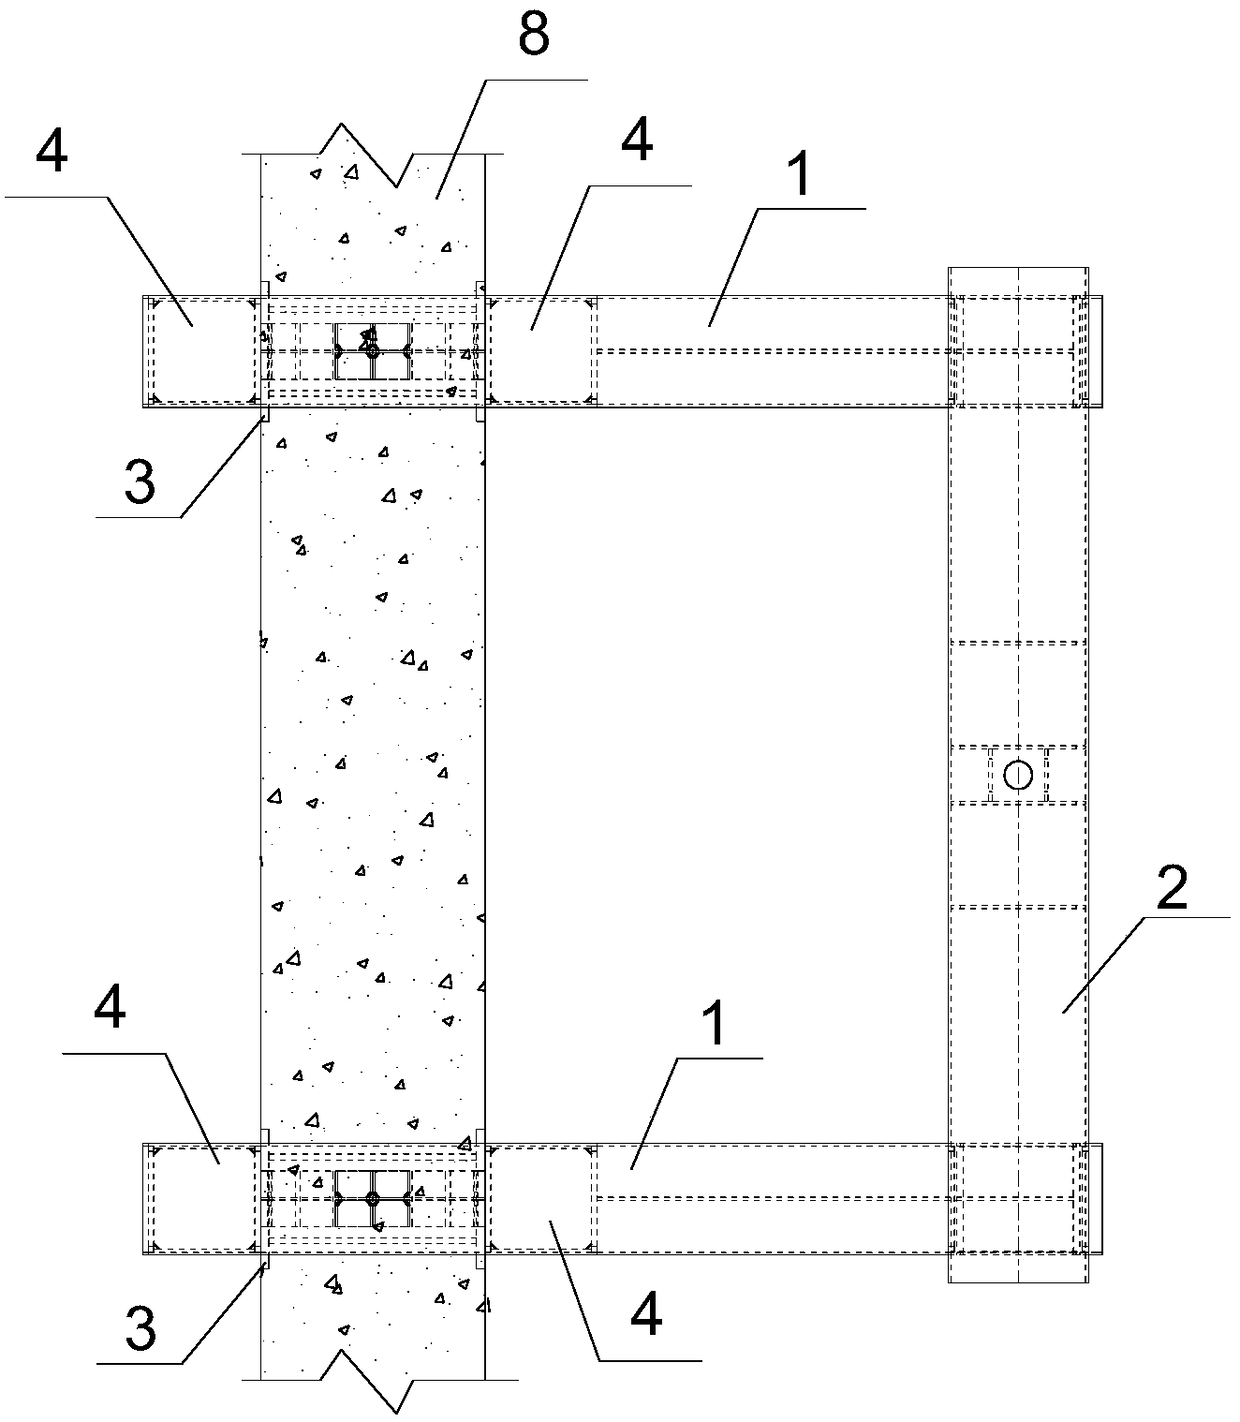 Laterally-mounted parallely-row carrying pole type lifting frame based on concrete independent beam